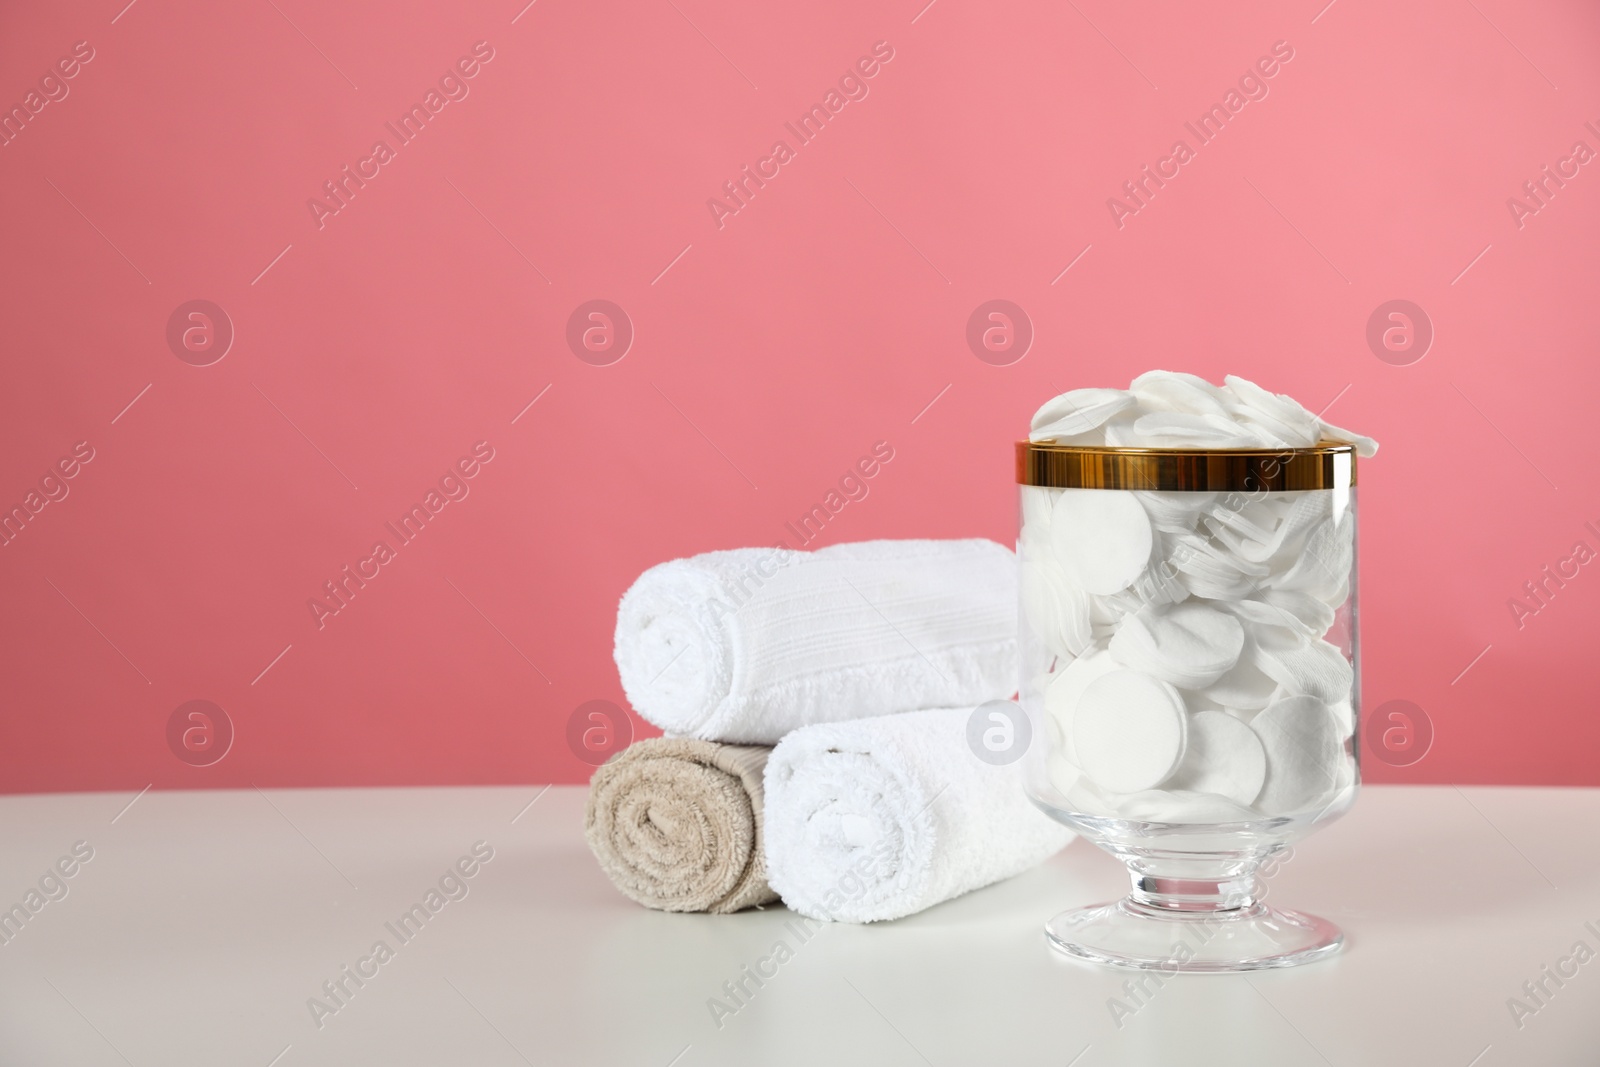 Photo of Jar with cotton pads on white table against pink background. Space for text